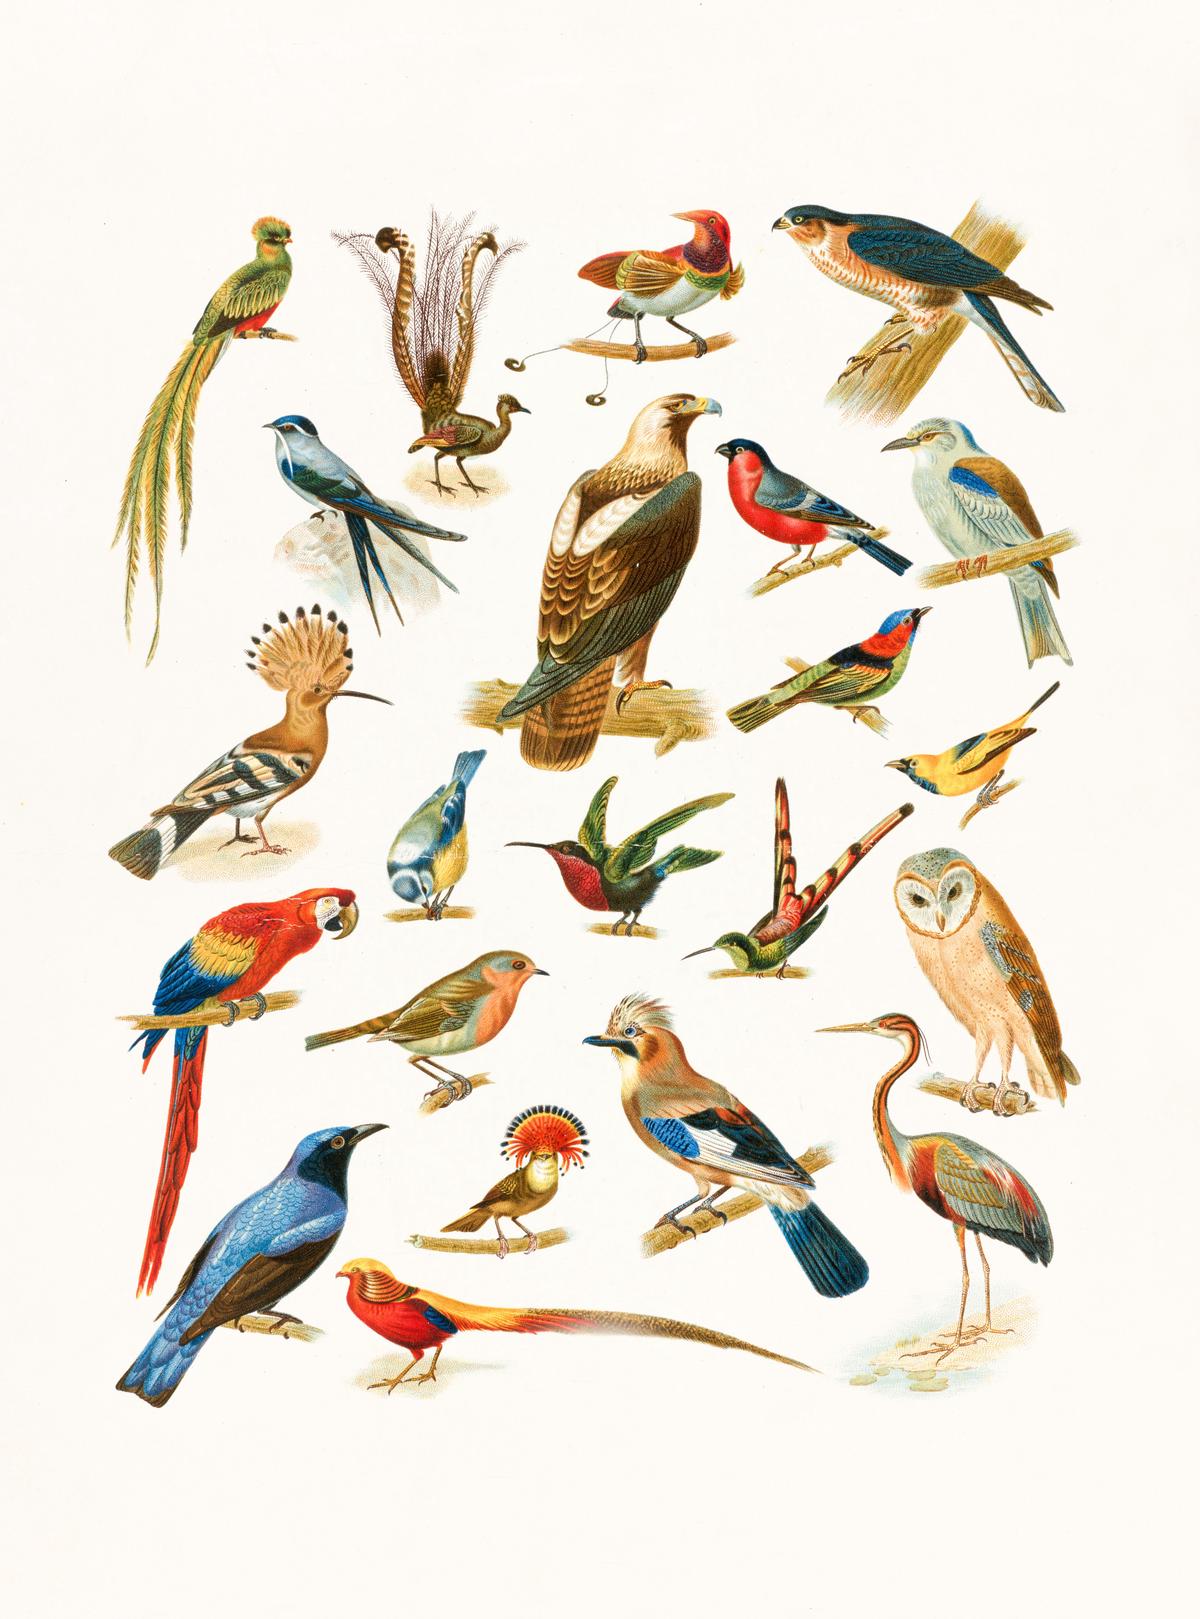 Various birds representing different symbols in the Bible.